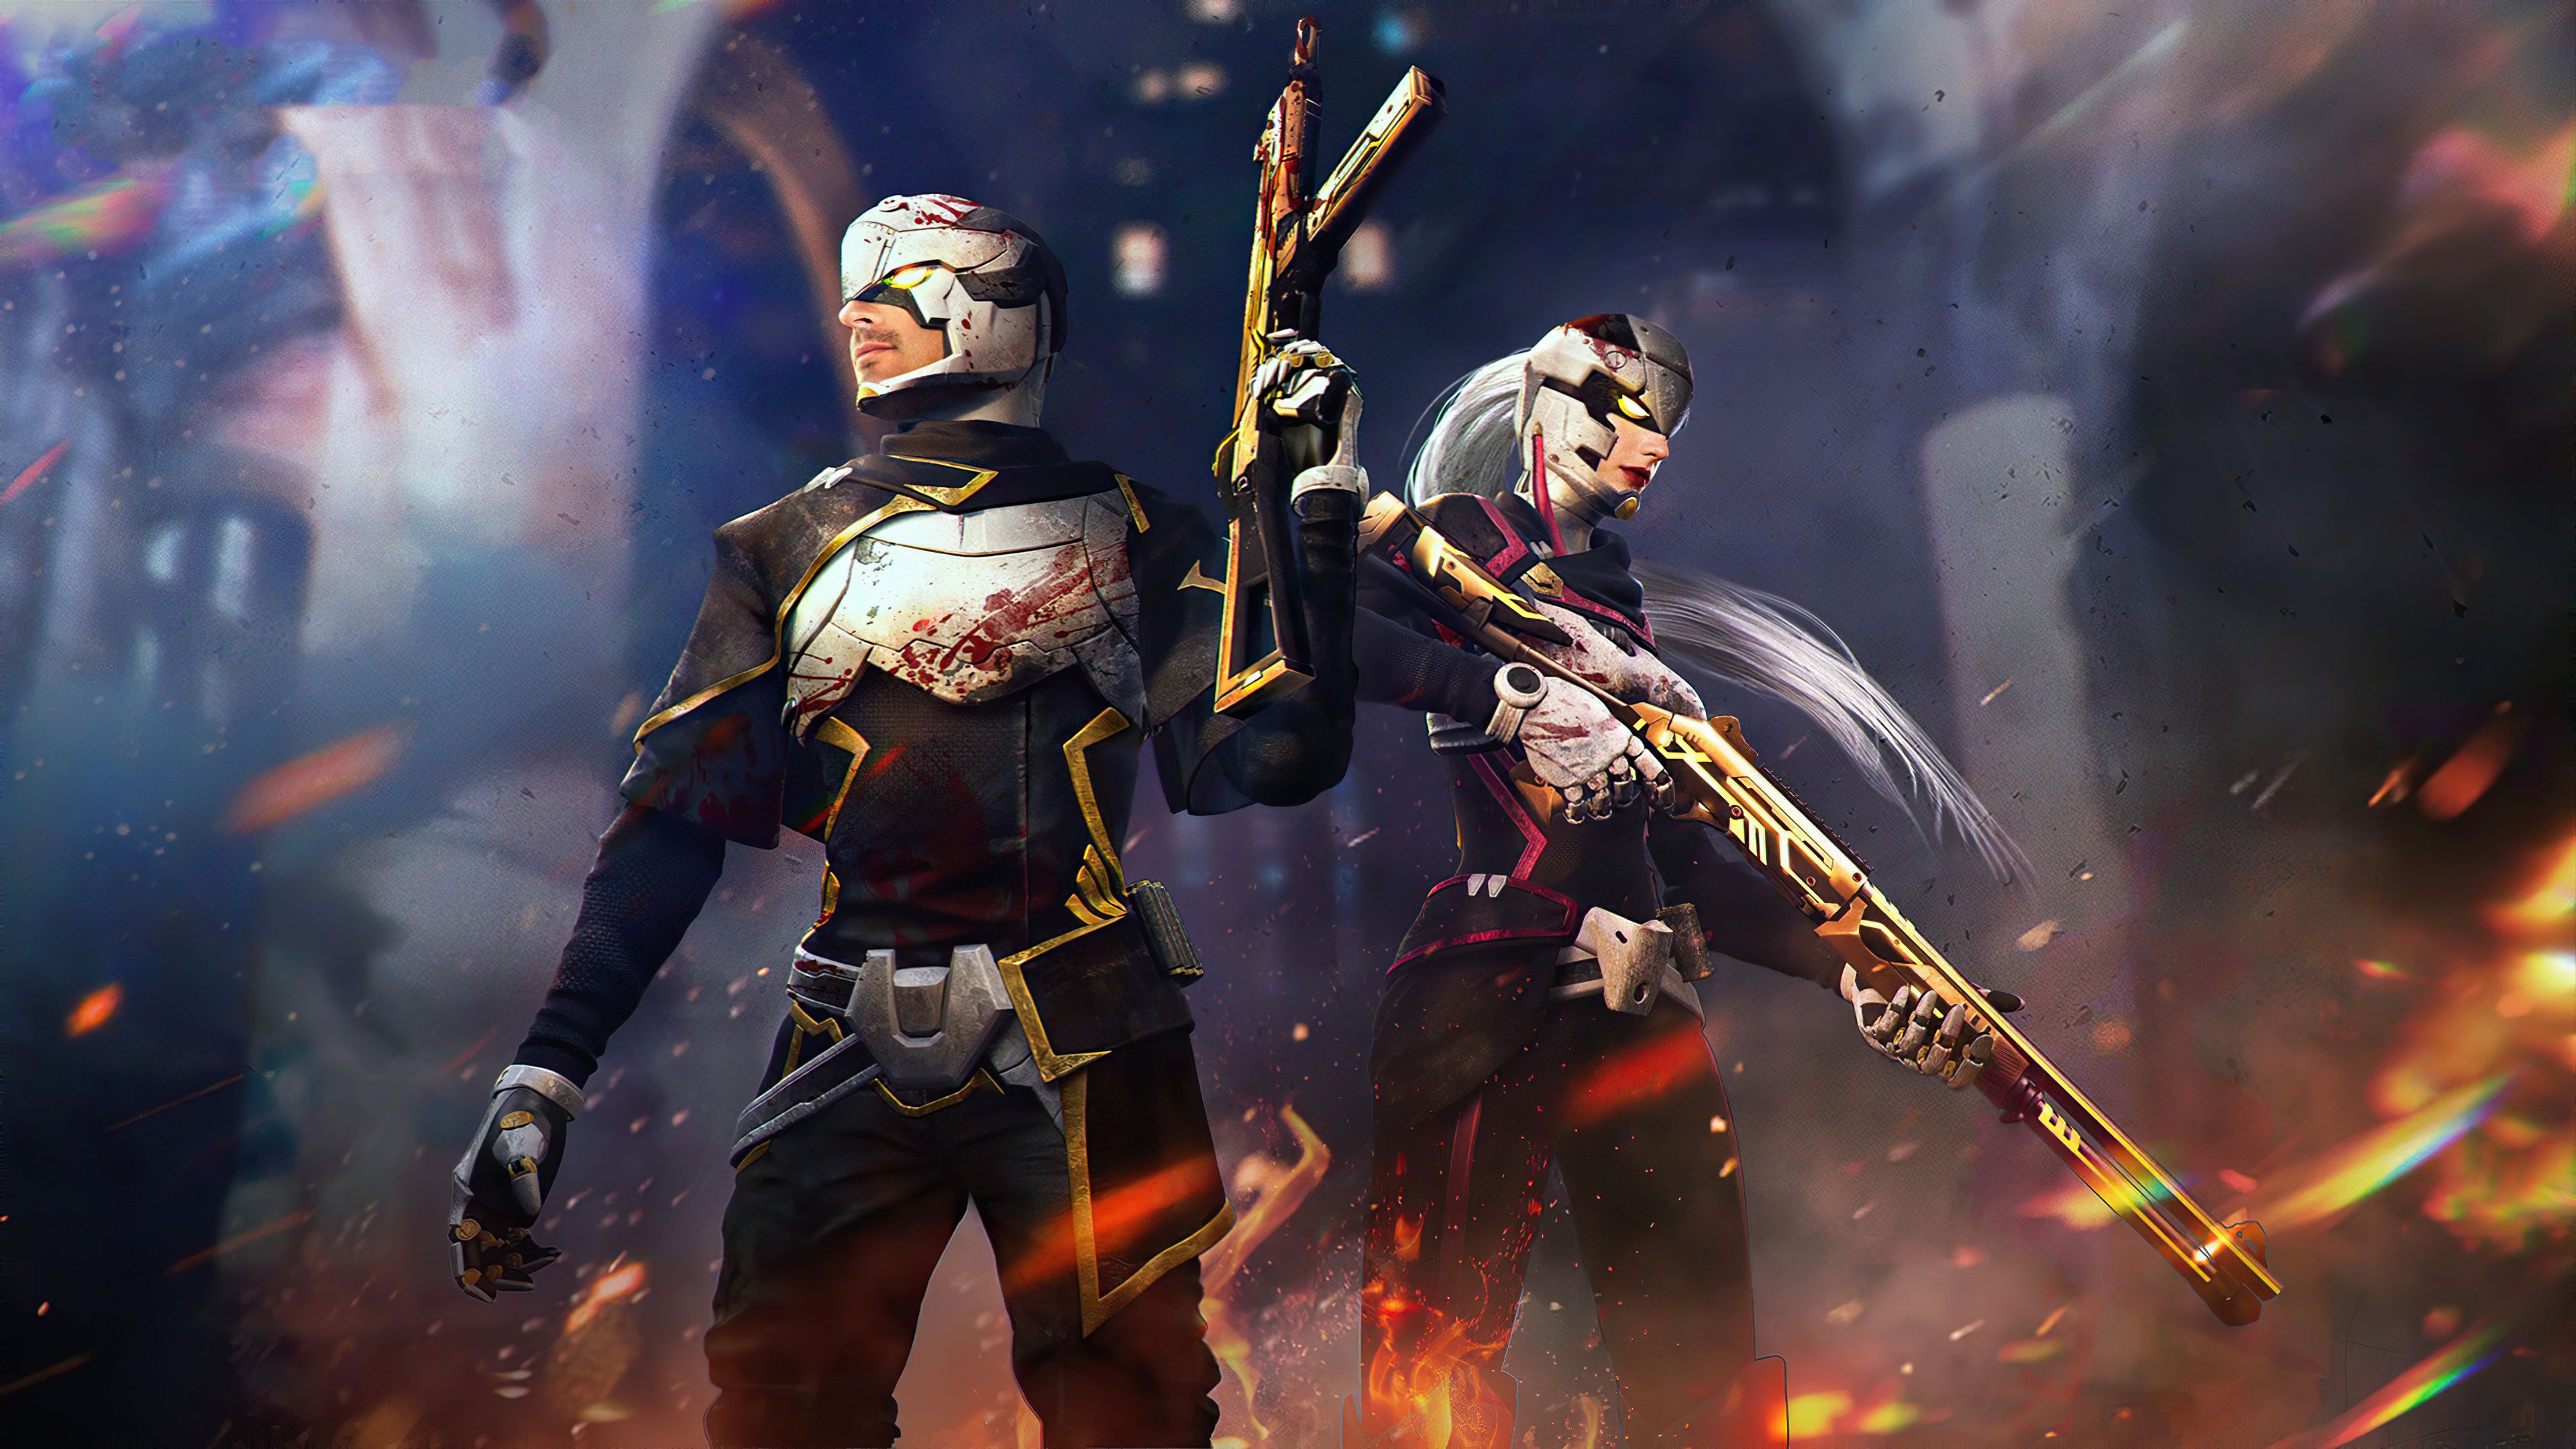 Garena Free Fire 2020 1080P Laptop Full HD Wallpaper, HD Games 4K Wallpaper, Image, Photo and Background